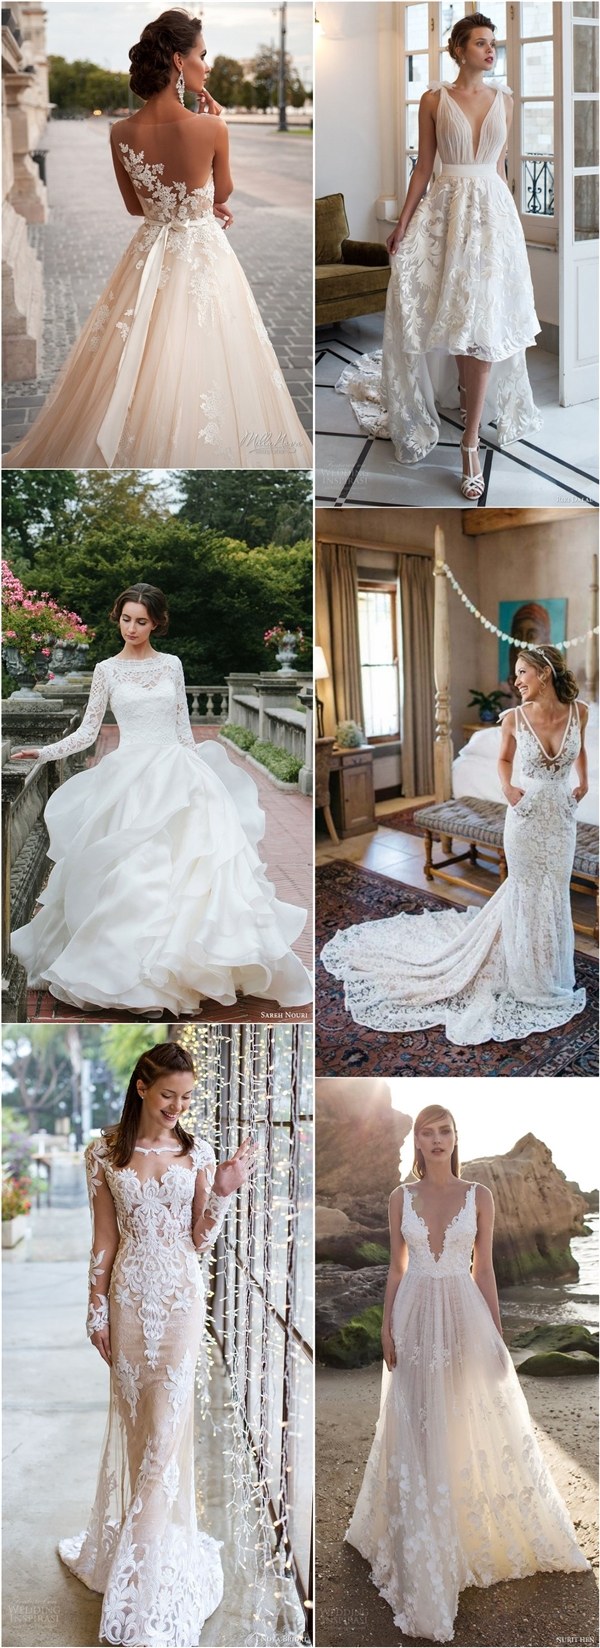 Lace Wedding Dresses and Bridal Gowns